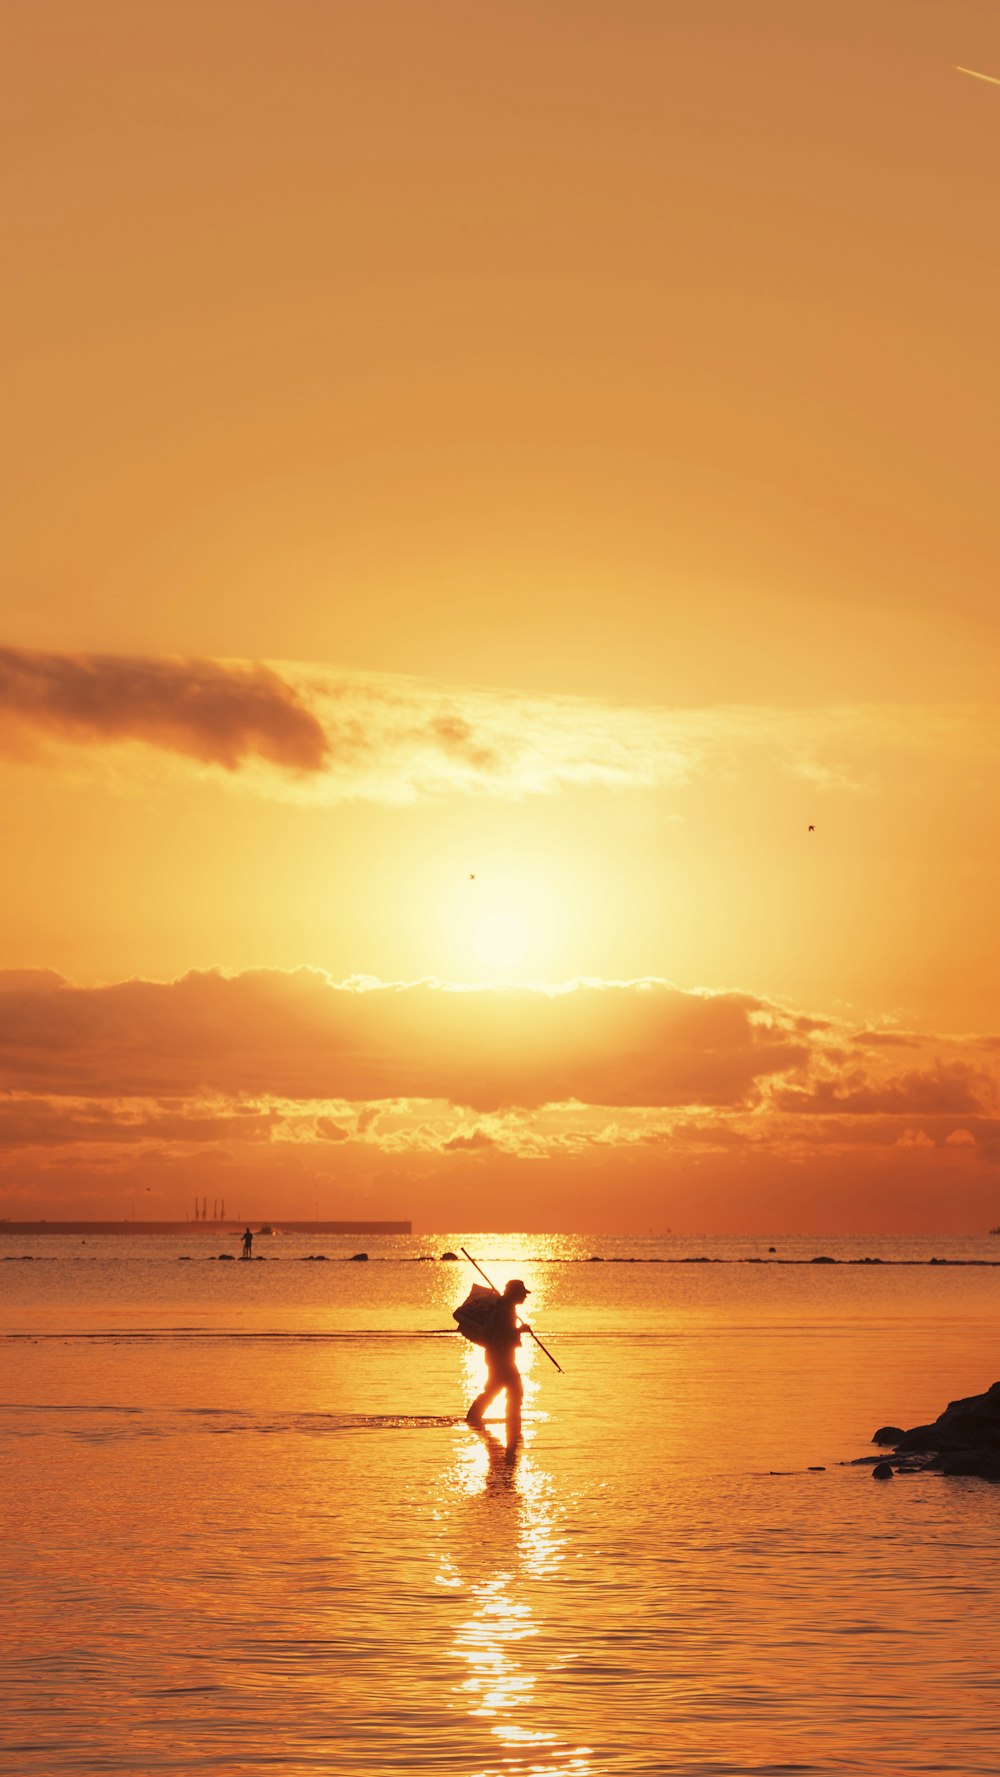 a person on a surfboard in the water at sunset